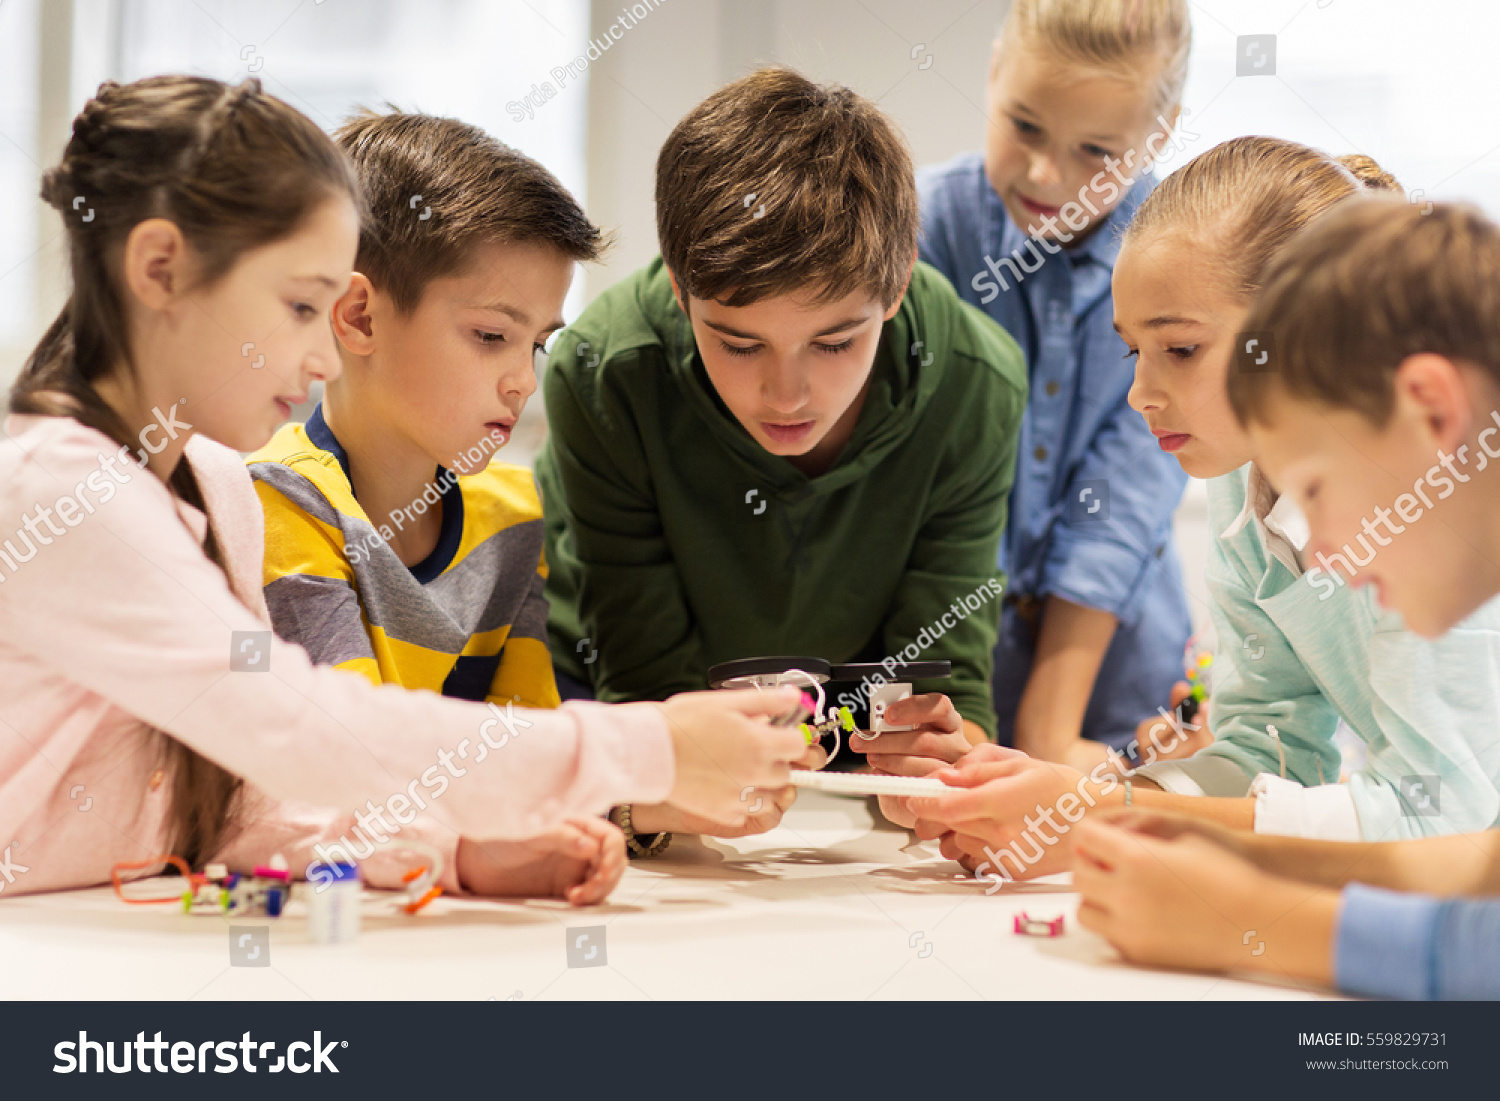 education, children, technology, science and people concept - group of happy kids building robots at robotics school lesson #559829731